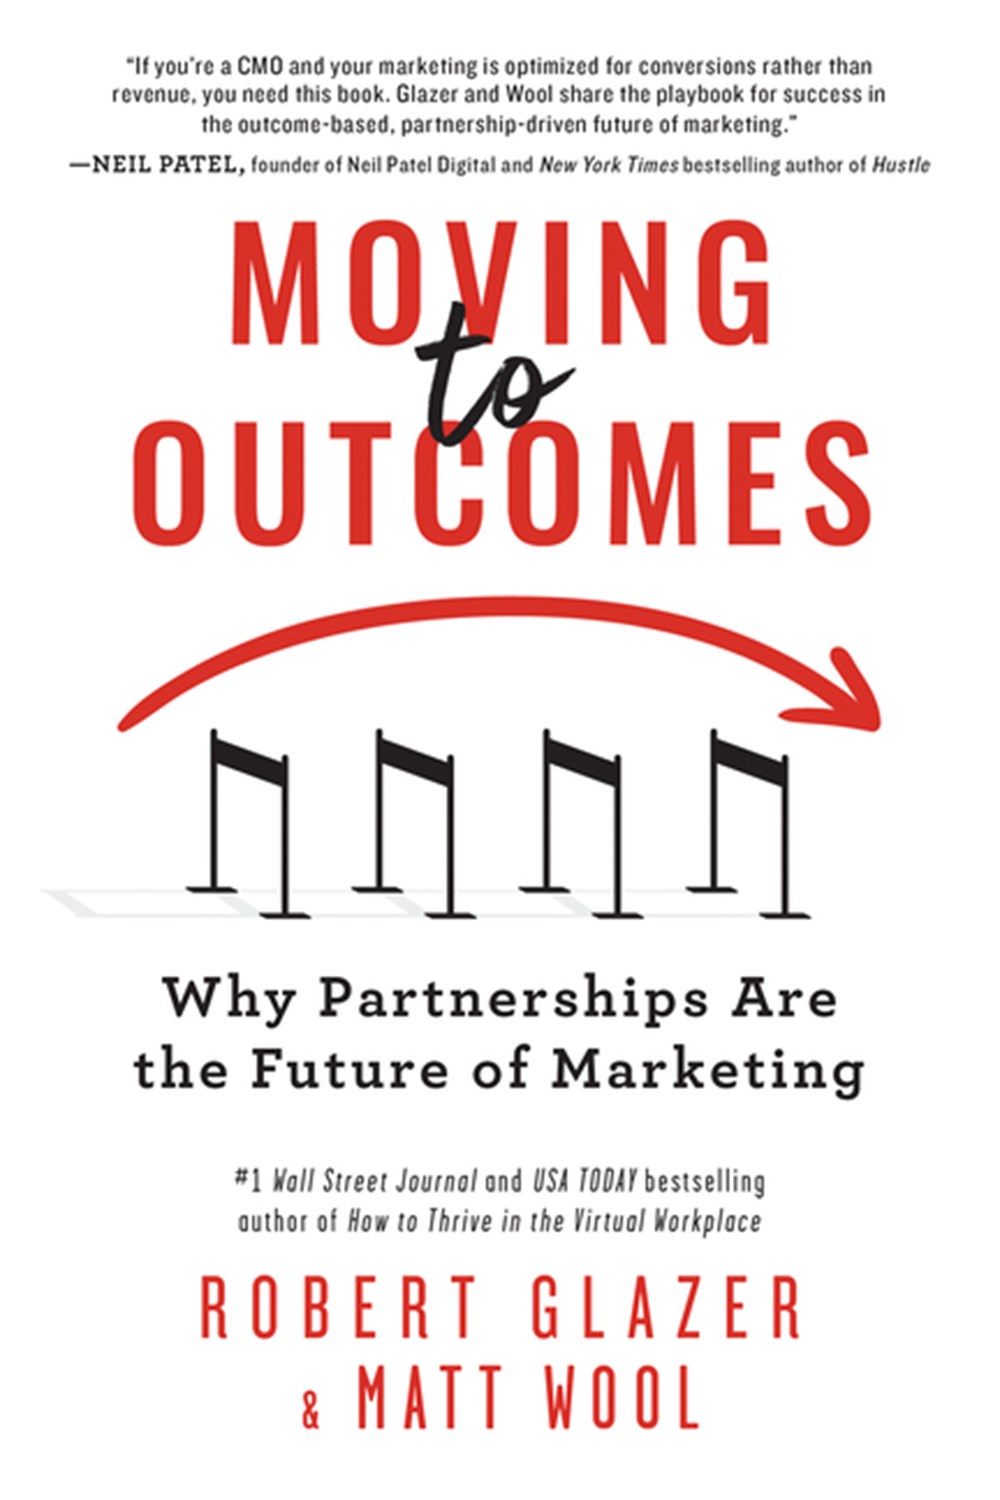 Moving to Outcomes: Why Partnerships Are the Future of Marketing